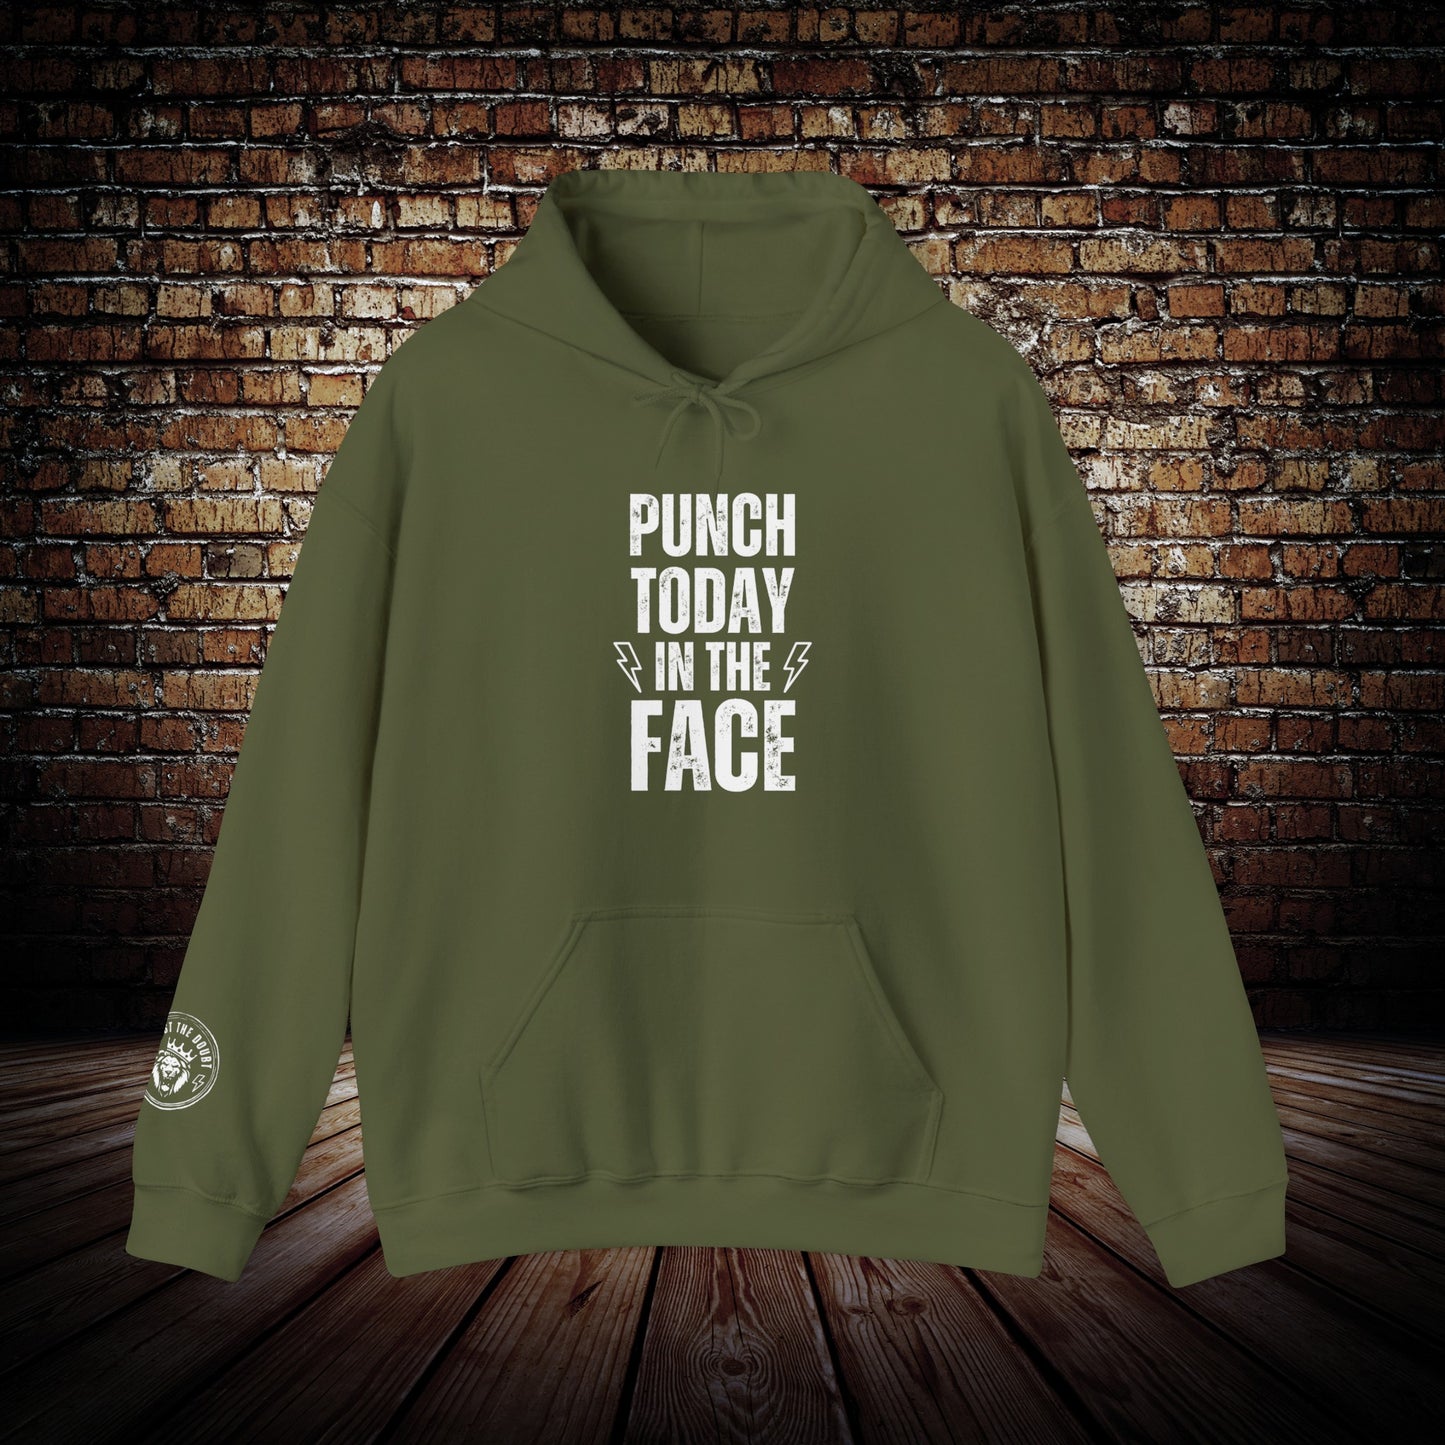 Outlast The Doubt - Punch Today in the Face Hoodie